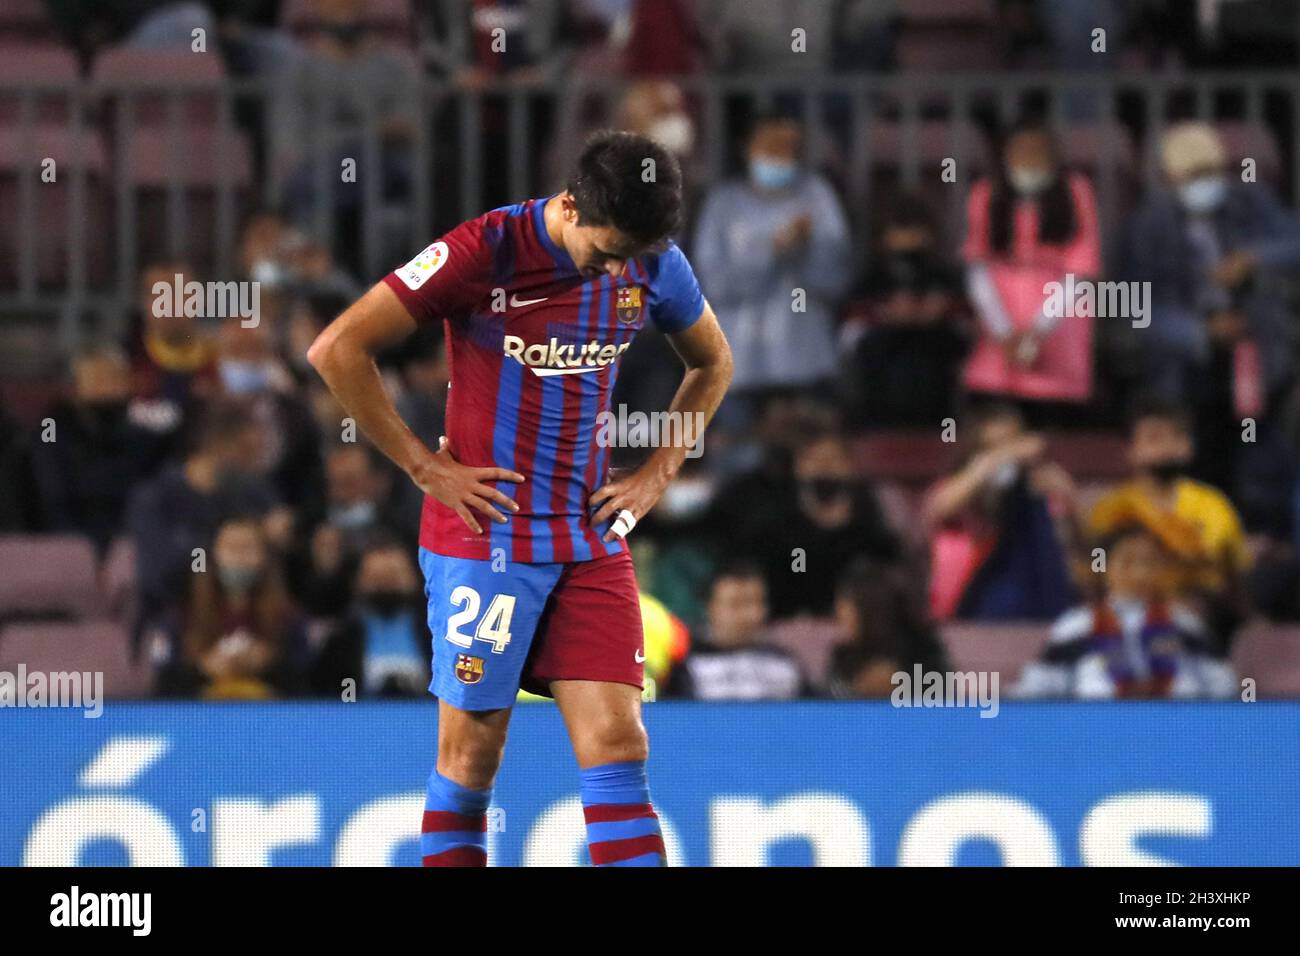 Barcelona, Spain. 30th Oct, 2021. Barcelona, Spain, October 30th 2021: Eric Garcia (24 FC Barcelona) disappointed after the match during, LaLiga Santander match between Barcelona and Alaves at Camp Nou stadium in Barcelona, Spain. Rafa Huerta/SPP Credit: SPP Sport Press Photo. /Alamy Live News Stock Photo